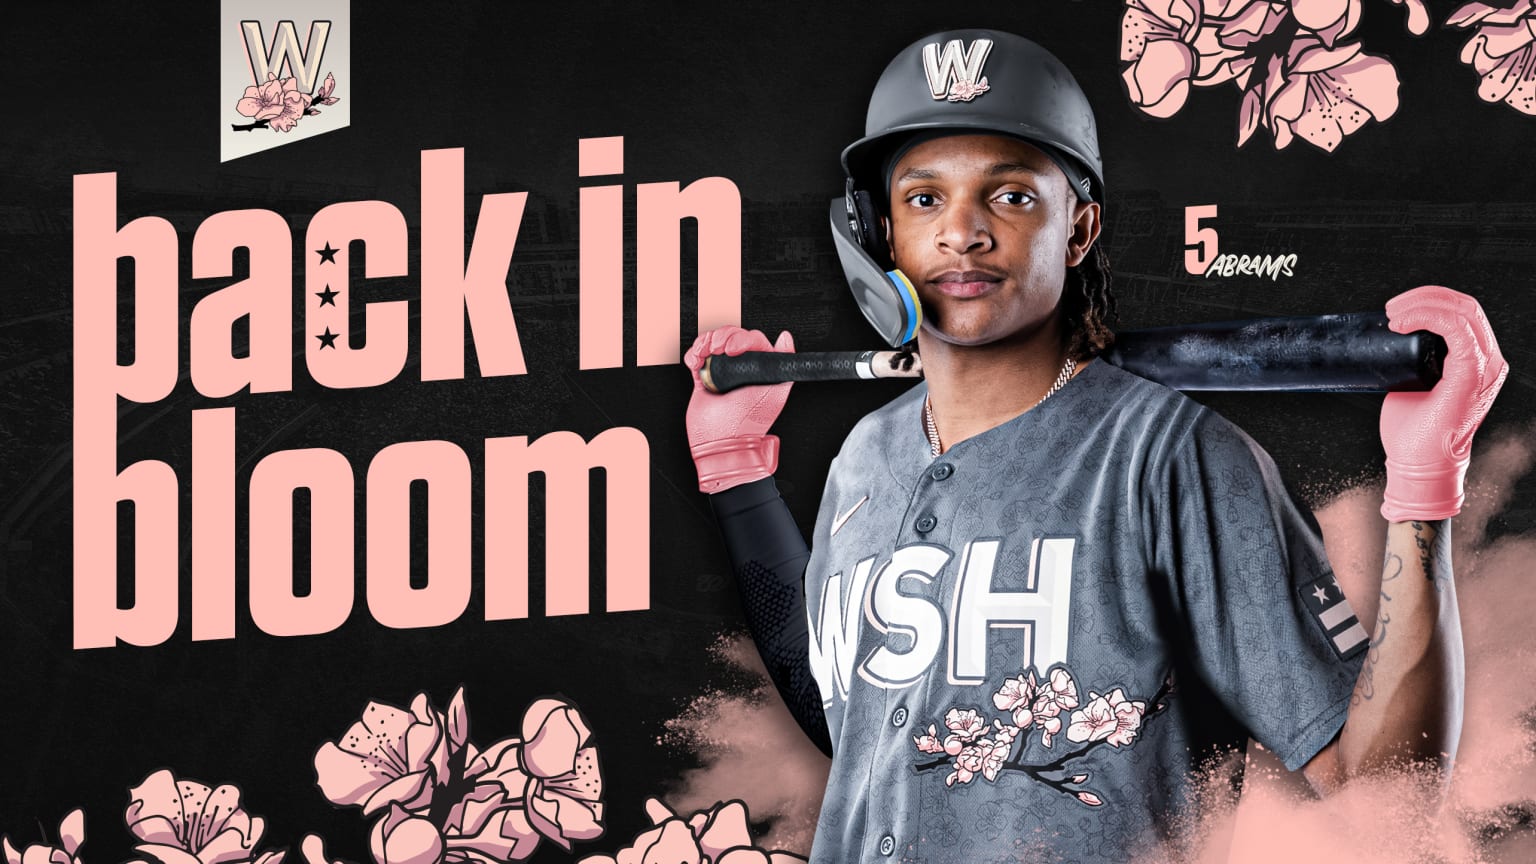 Washington Nationals cherry blossom uniforms: What 2022 MLB City Connect  uniforms look like, how to buy them - DraftKings Network